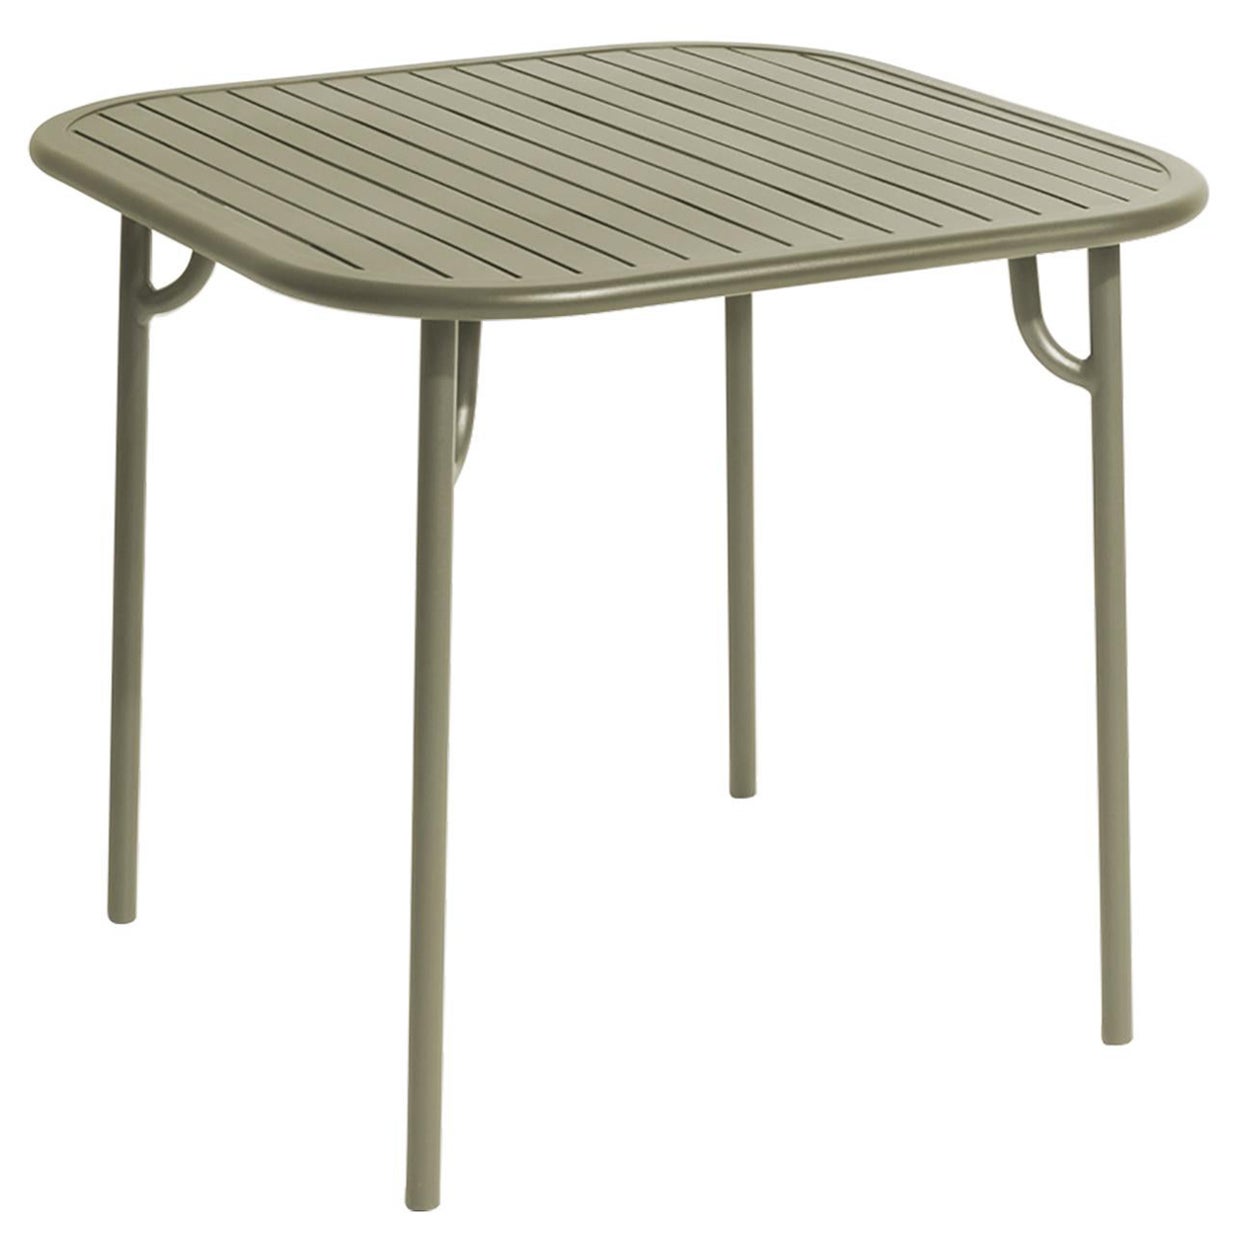 Petite Friture Week-End Square Dining Table in Jade Green Aluminium with Slats